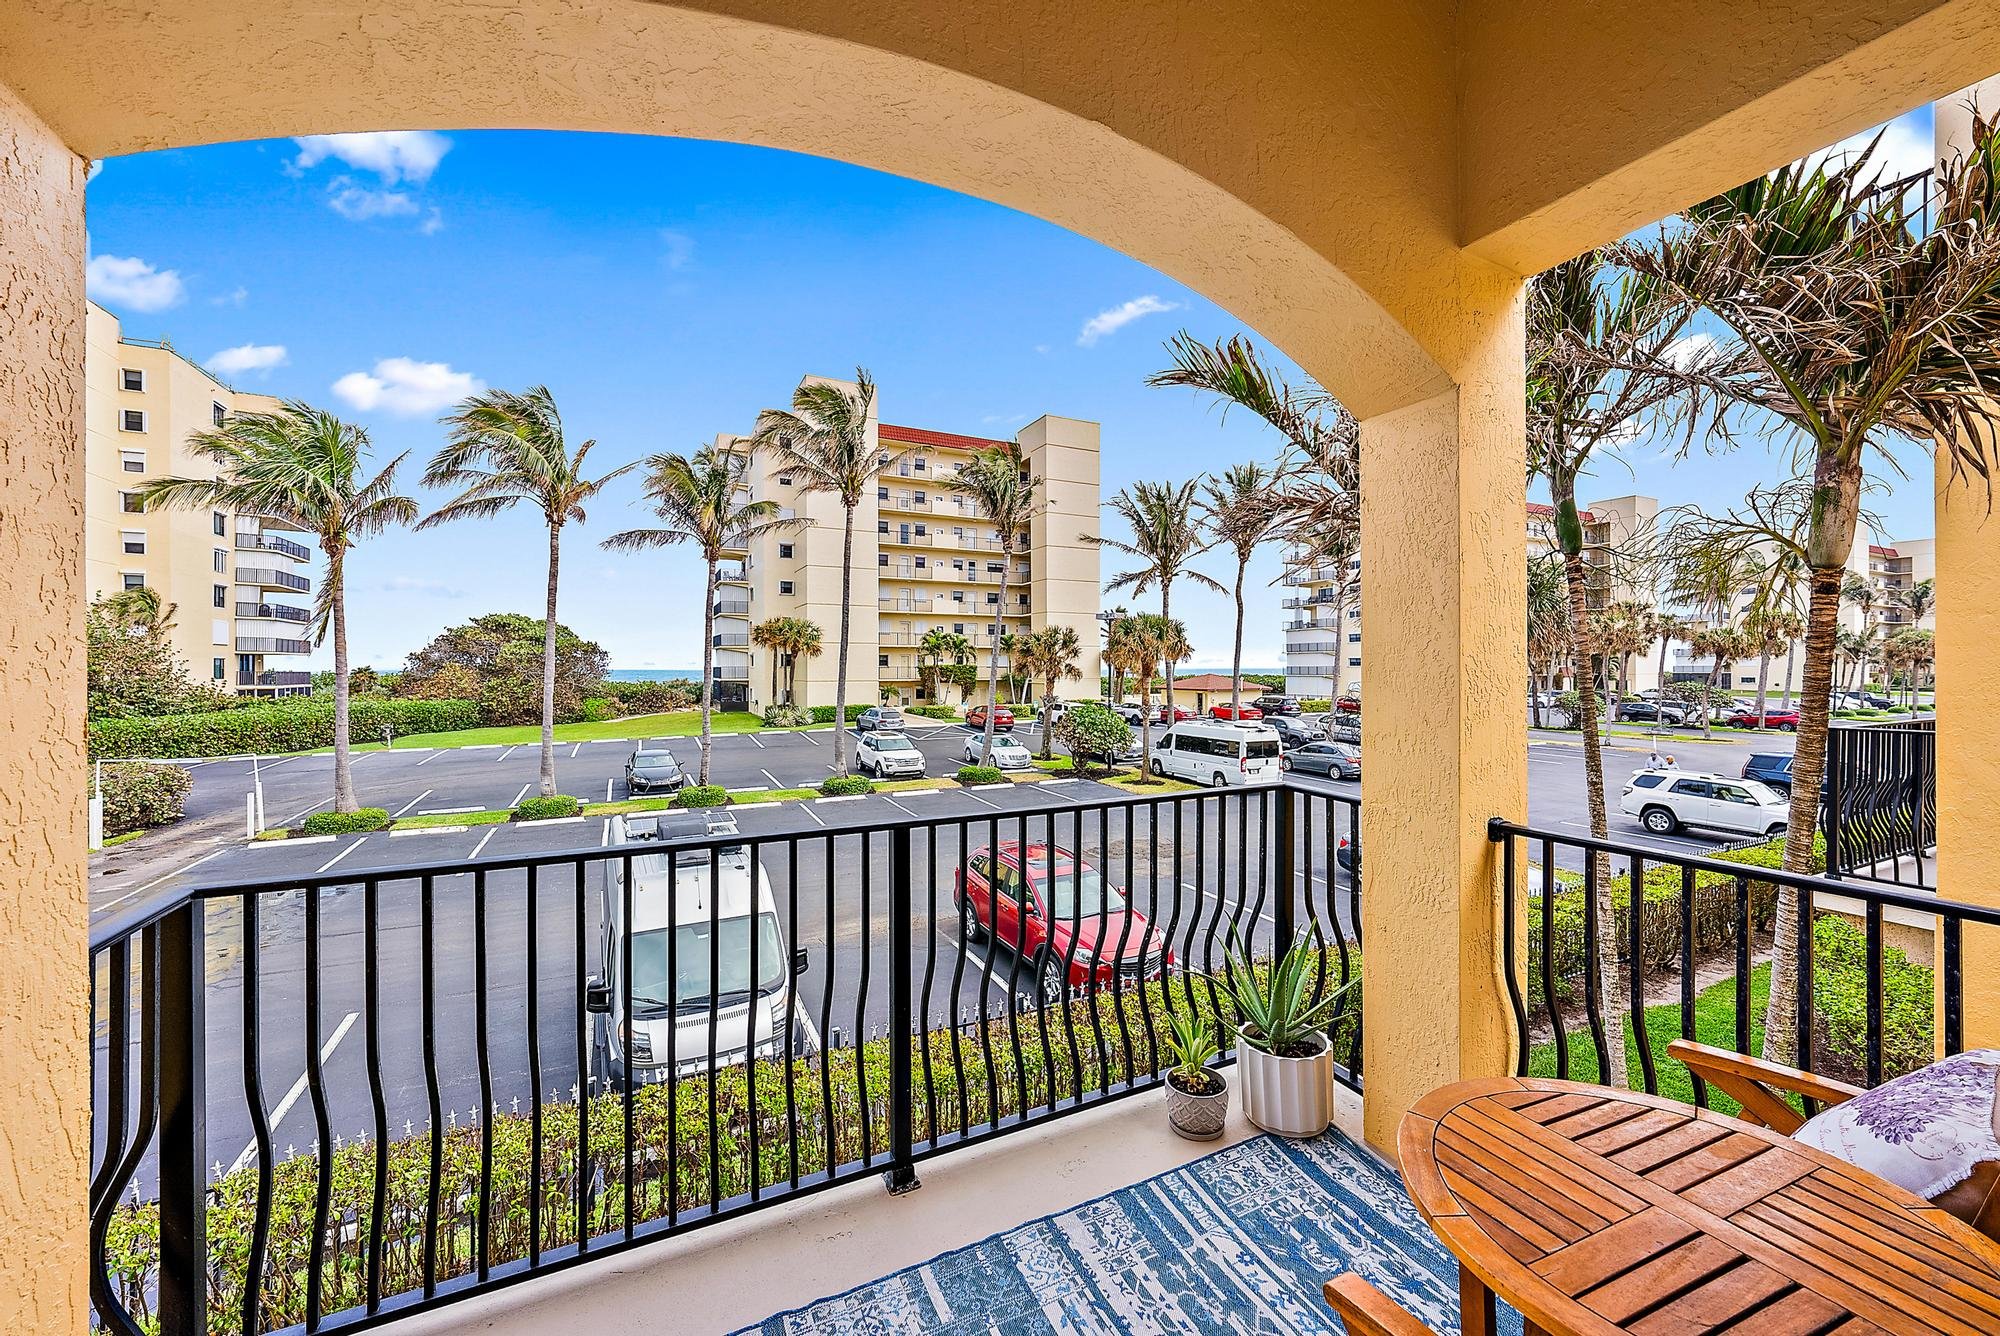 townhouse for sale with balconies patio private elevator by beach